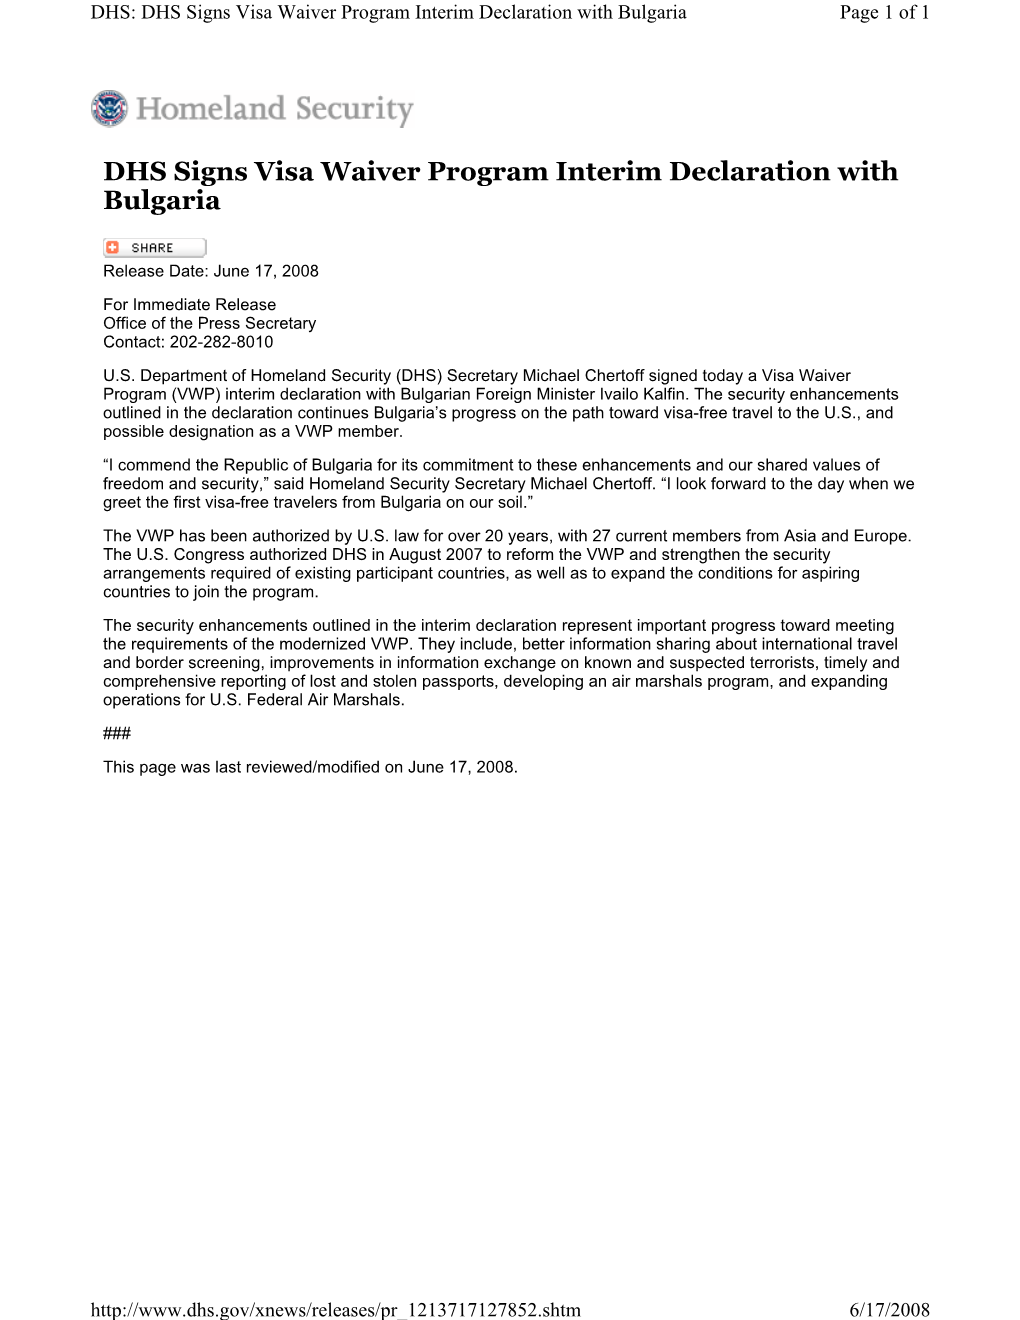 DHS Signs Visa Waiver Program Interim Declaration with Bulgaria Page 1 of 1